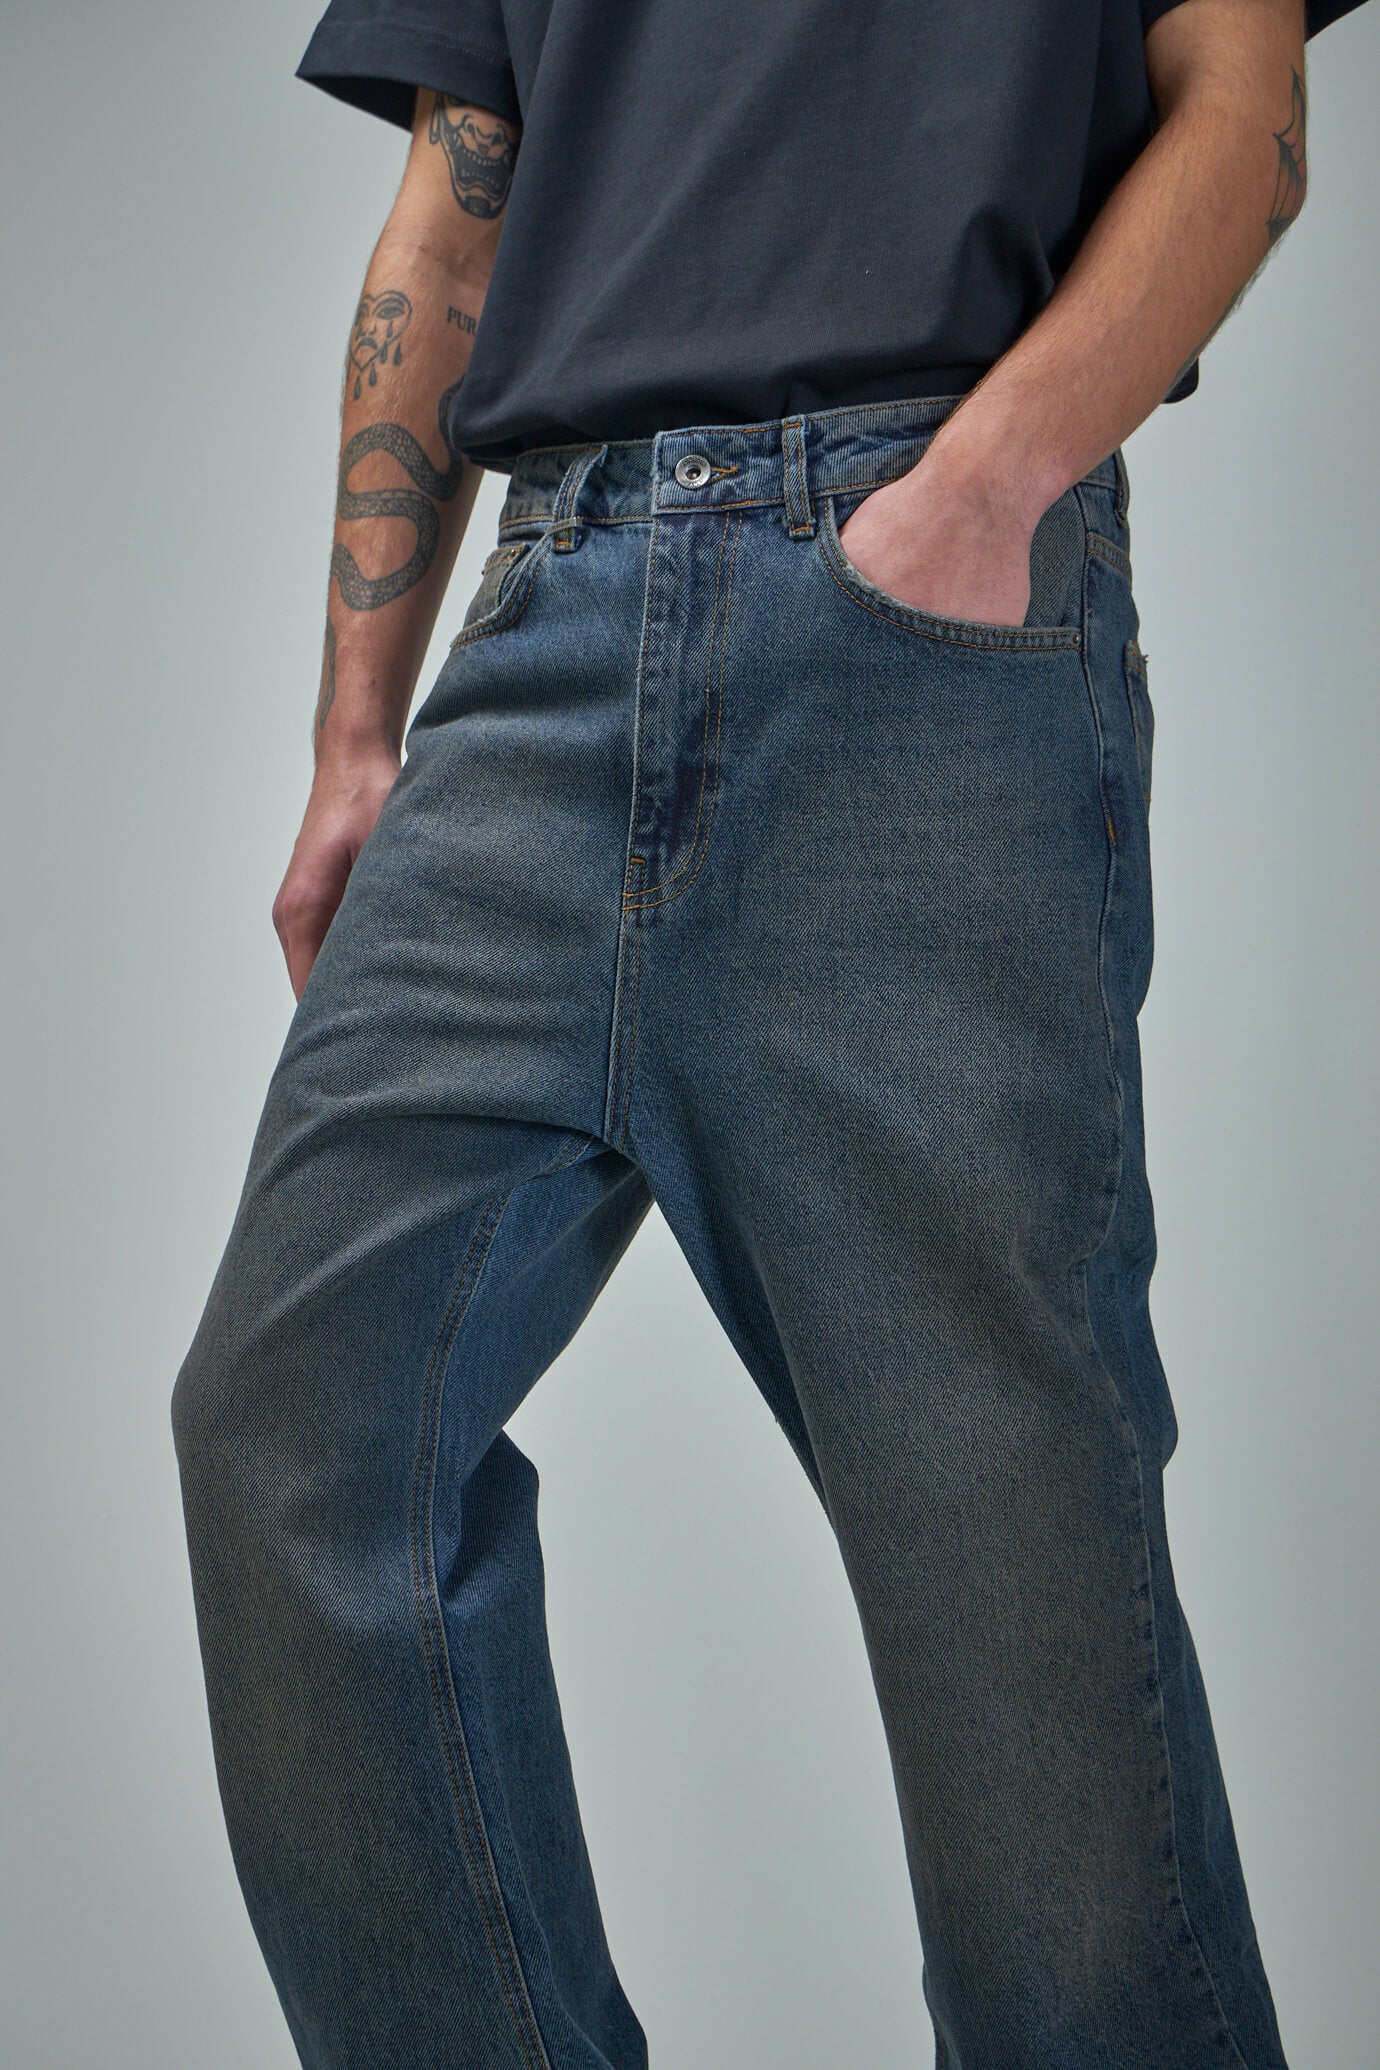 Metropole Bootcut Flared Jeans